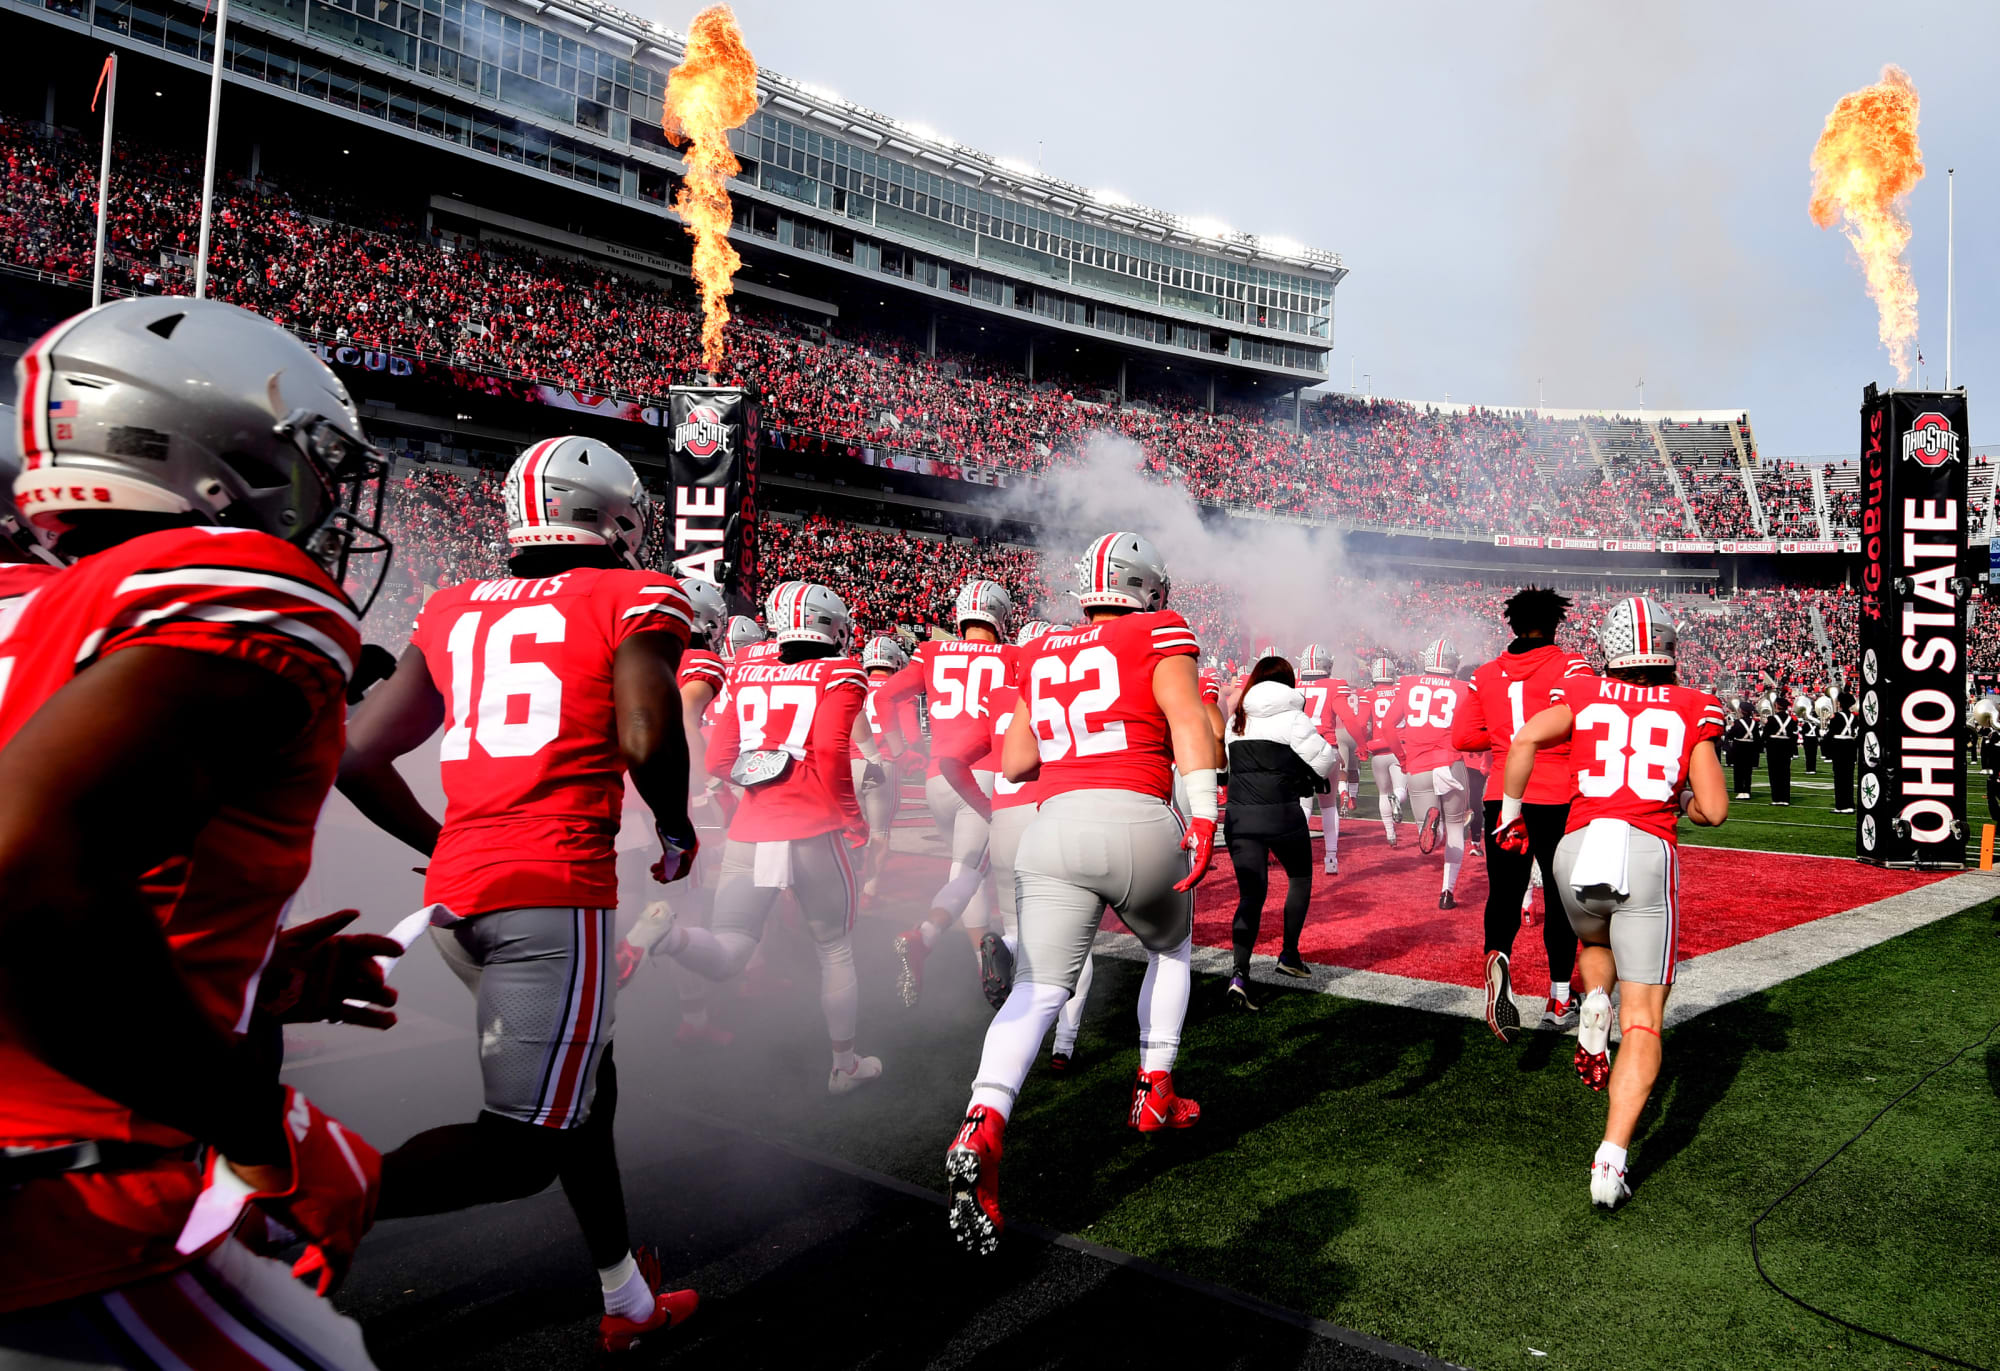 Ohio State football How high can they get in recruiting rankings?